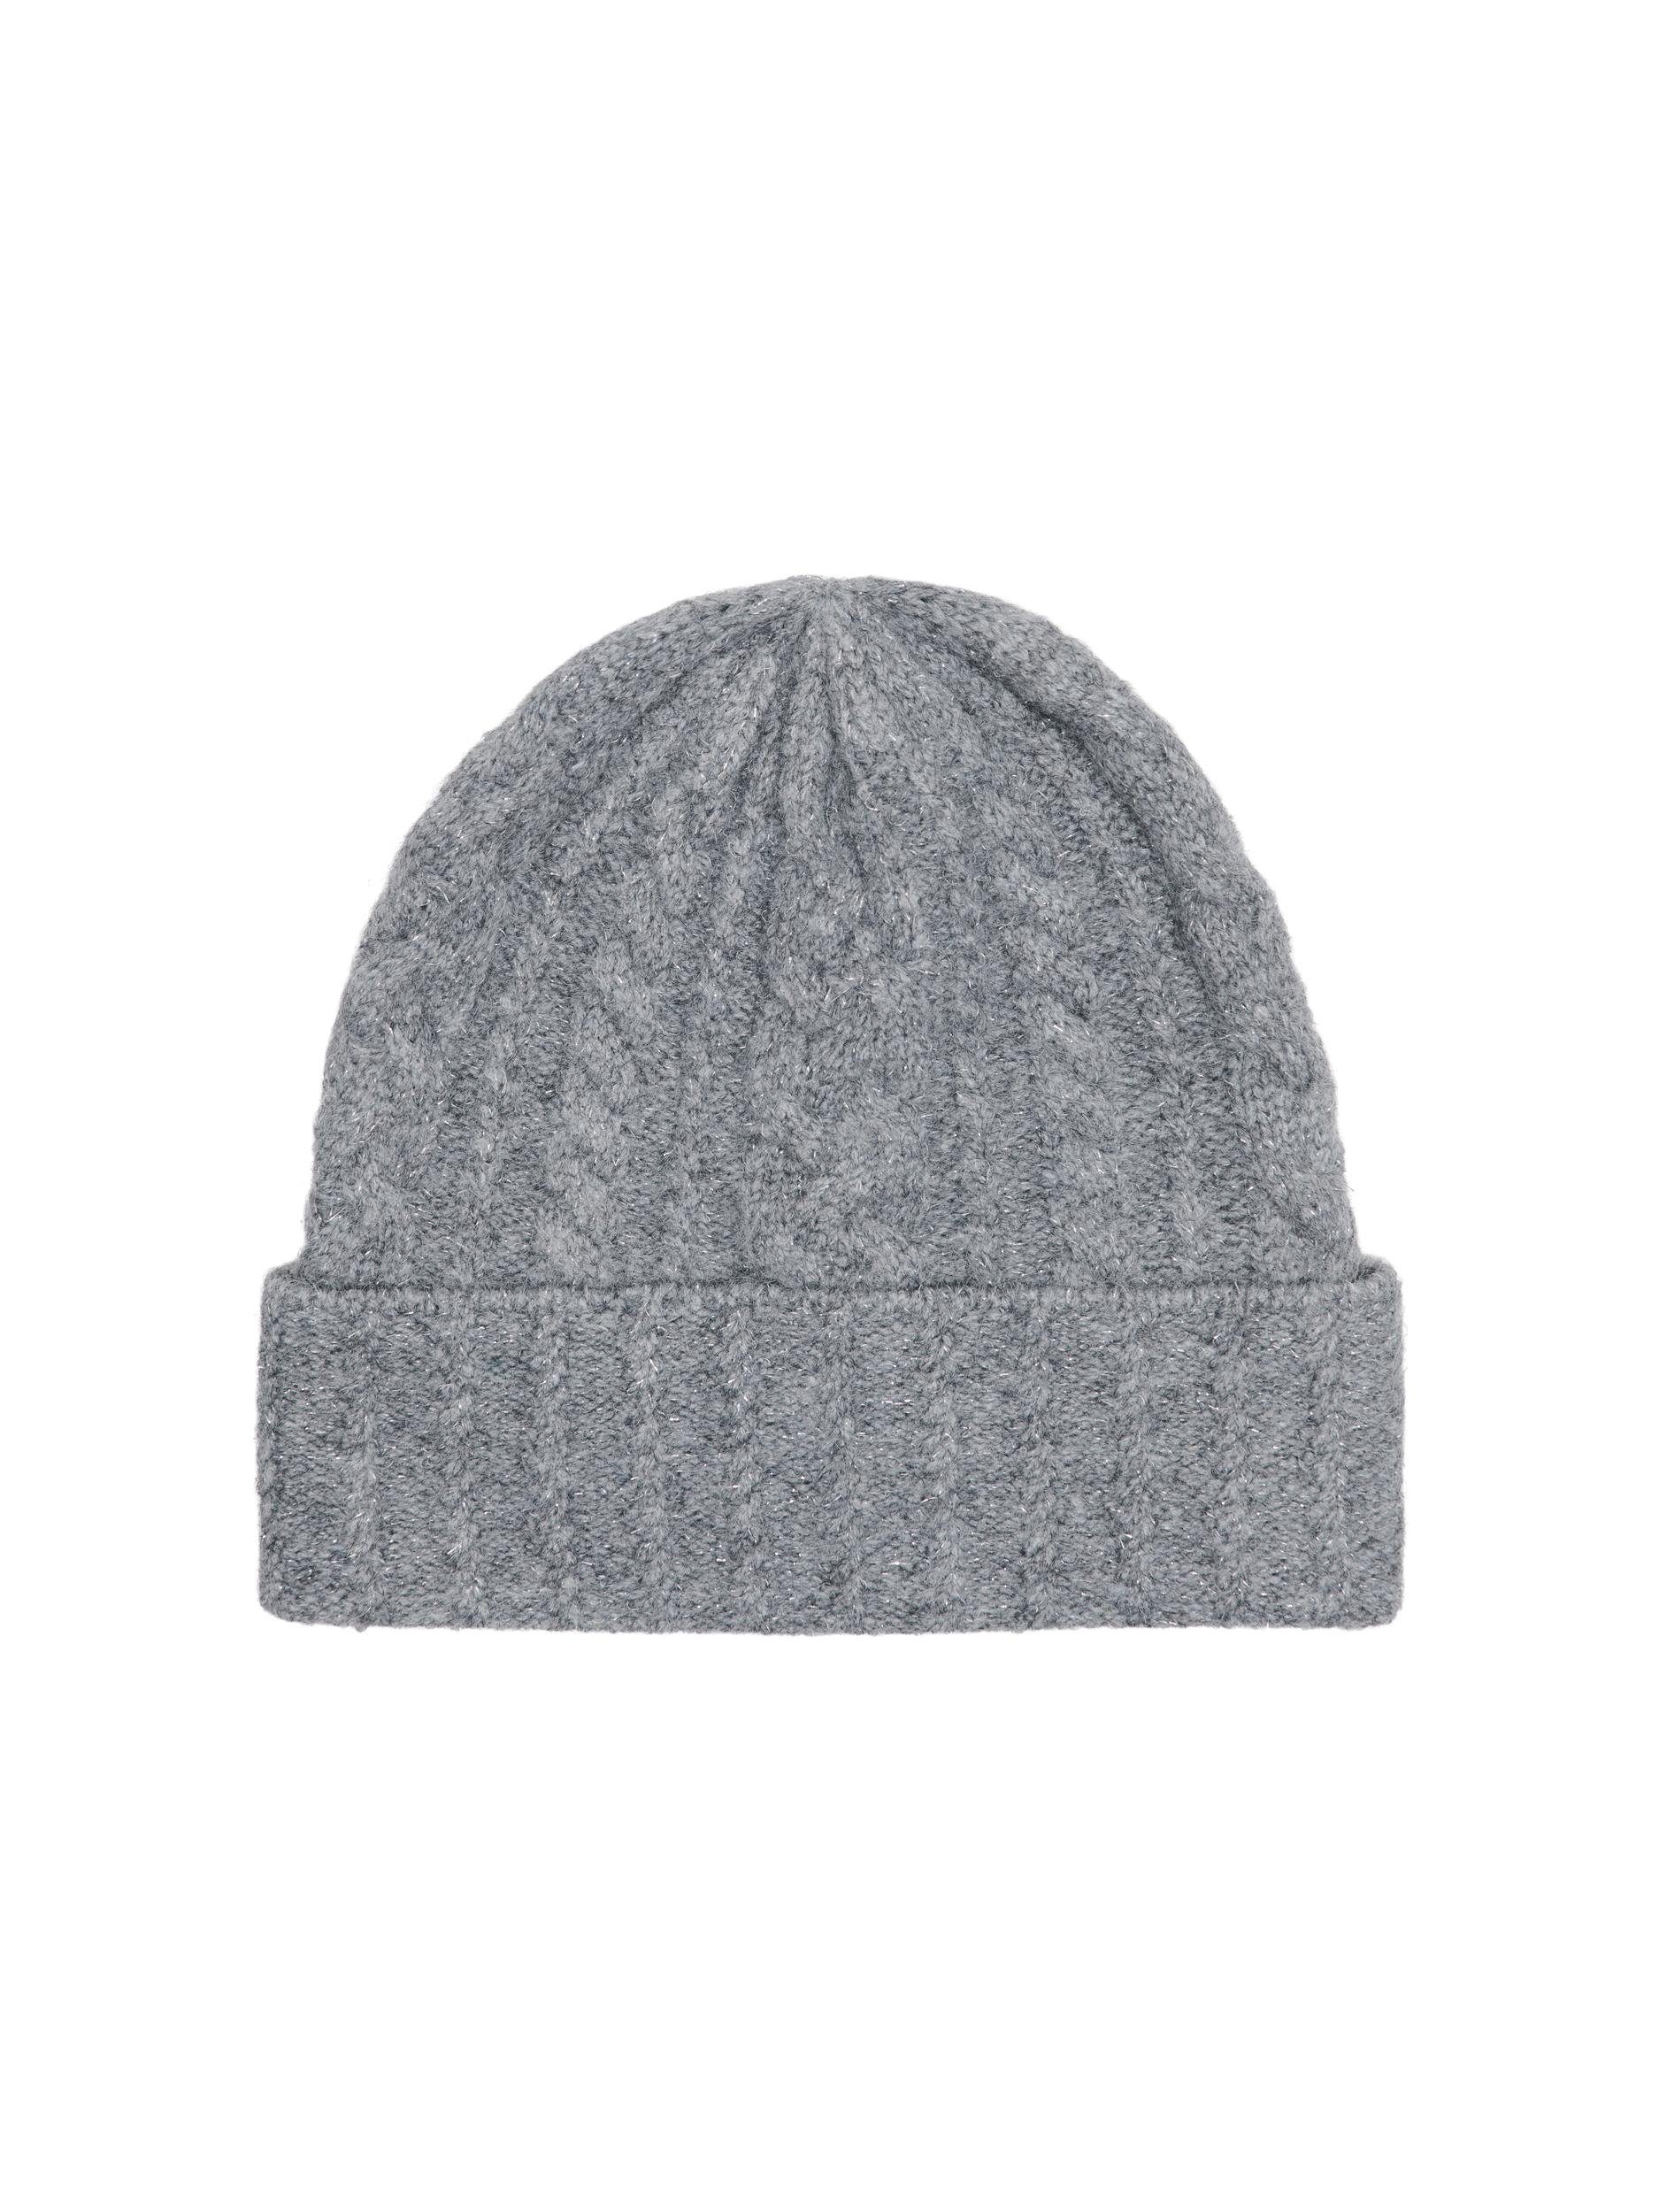 KNIT ONLSALLY LUREX Beanie Melange LIFE CABLE CC Grey ONLY Light BEANIE